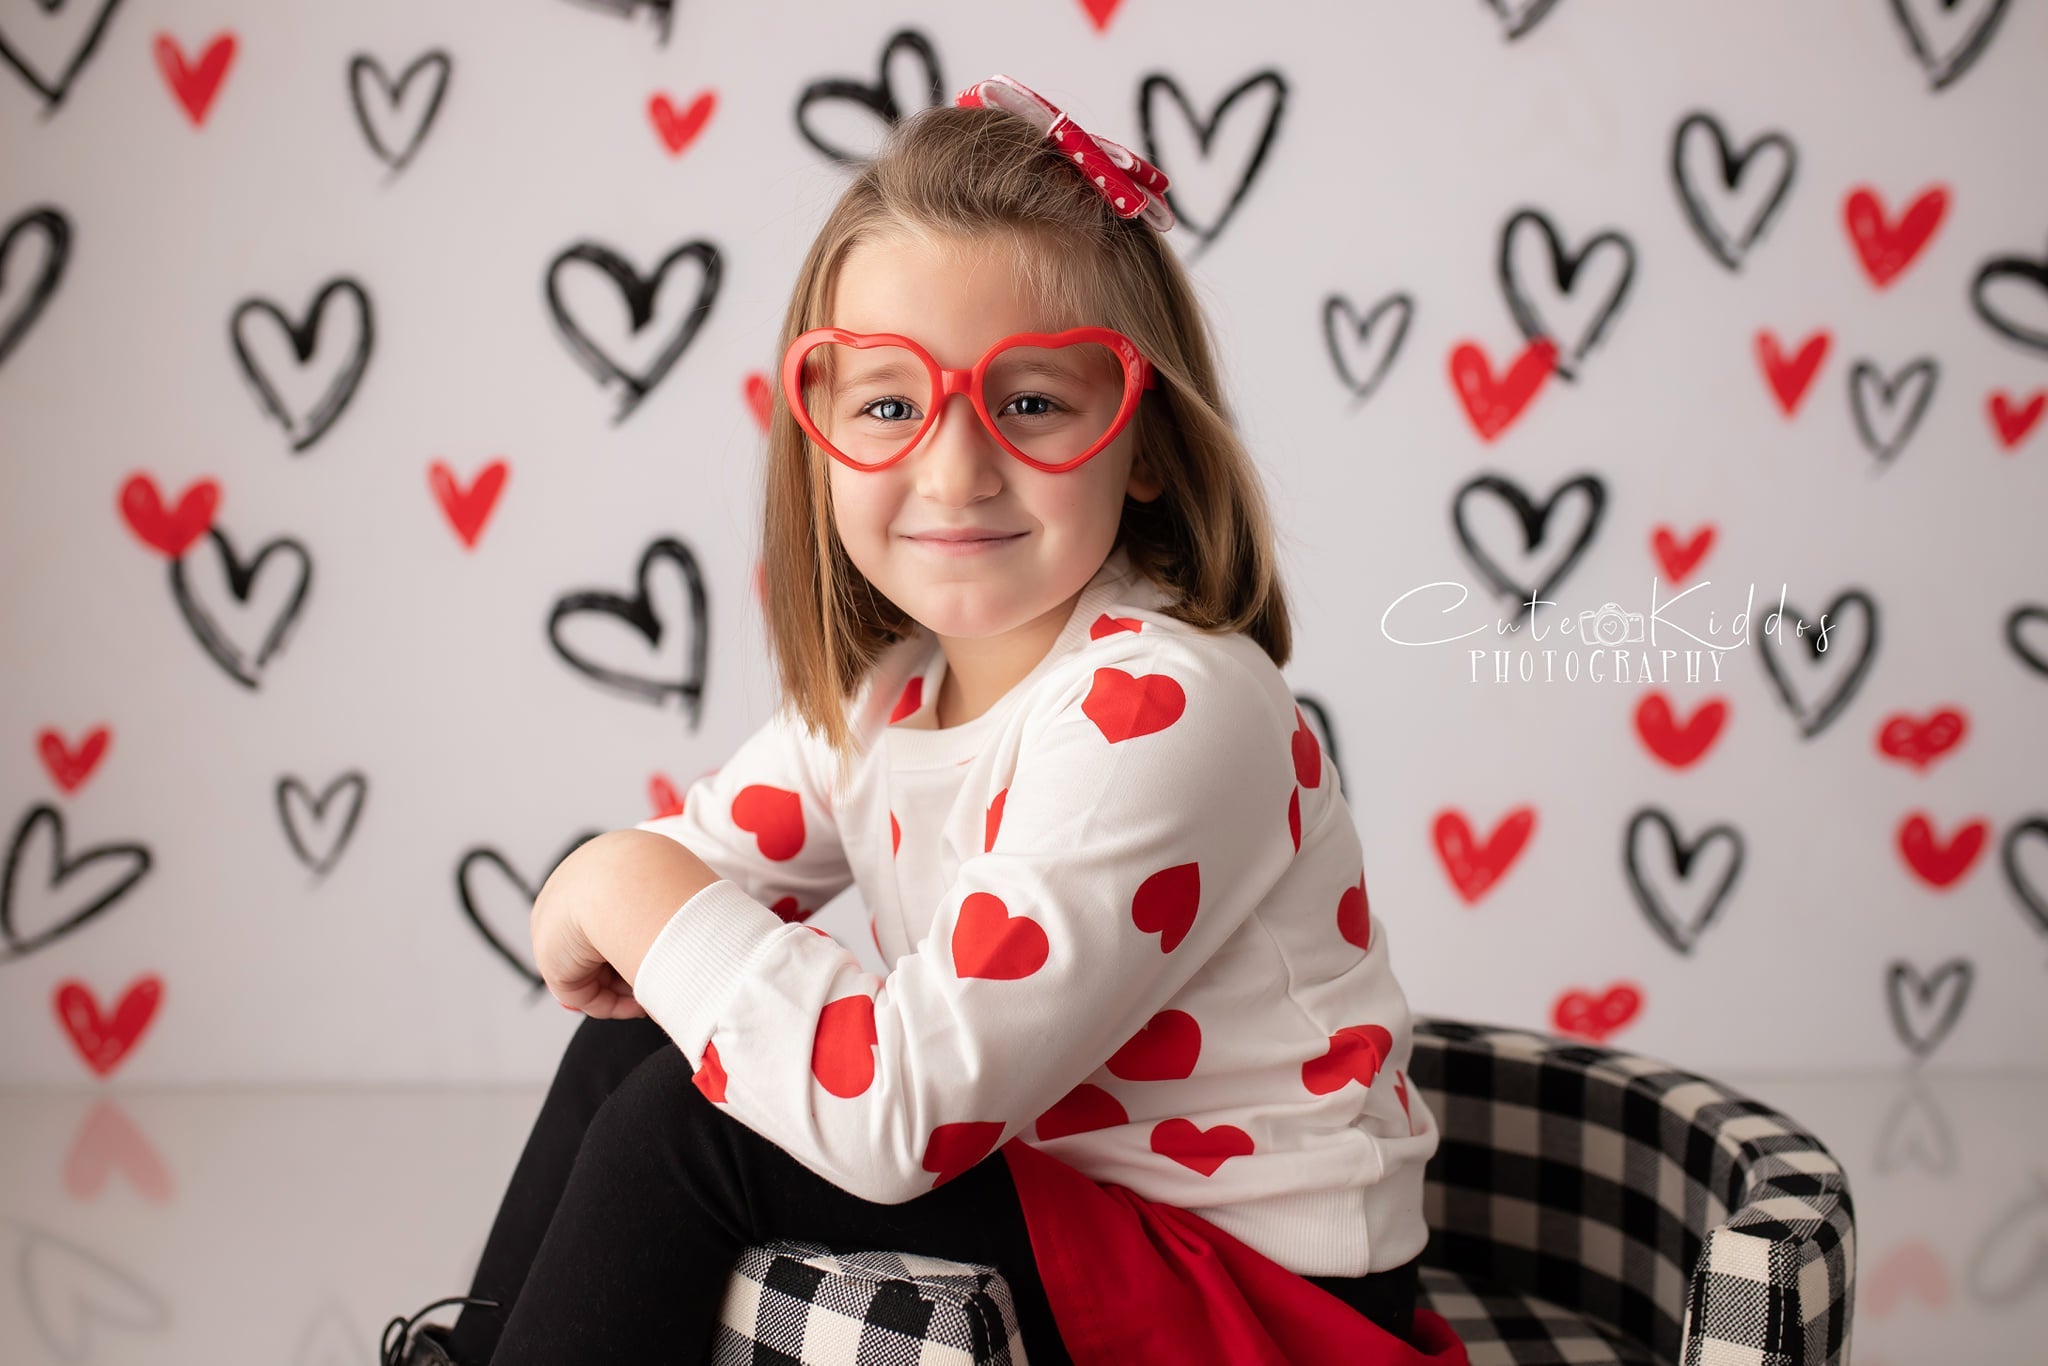 Kate 7x5ft Valentine's Day Backdrop White for Photography (only shipping to Canada)